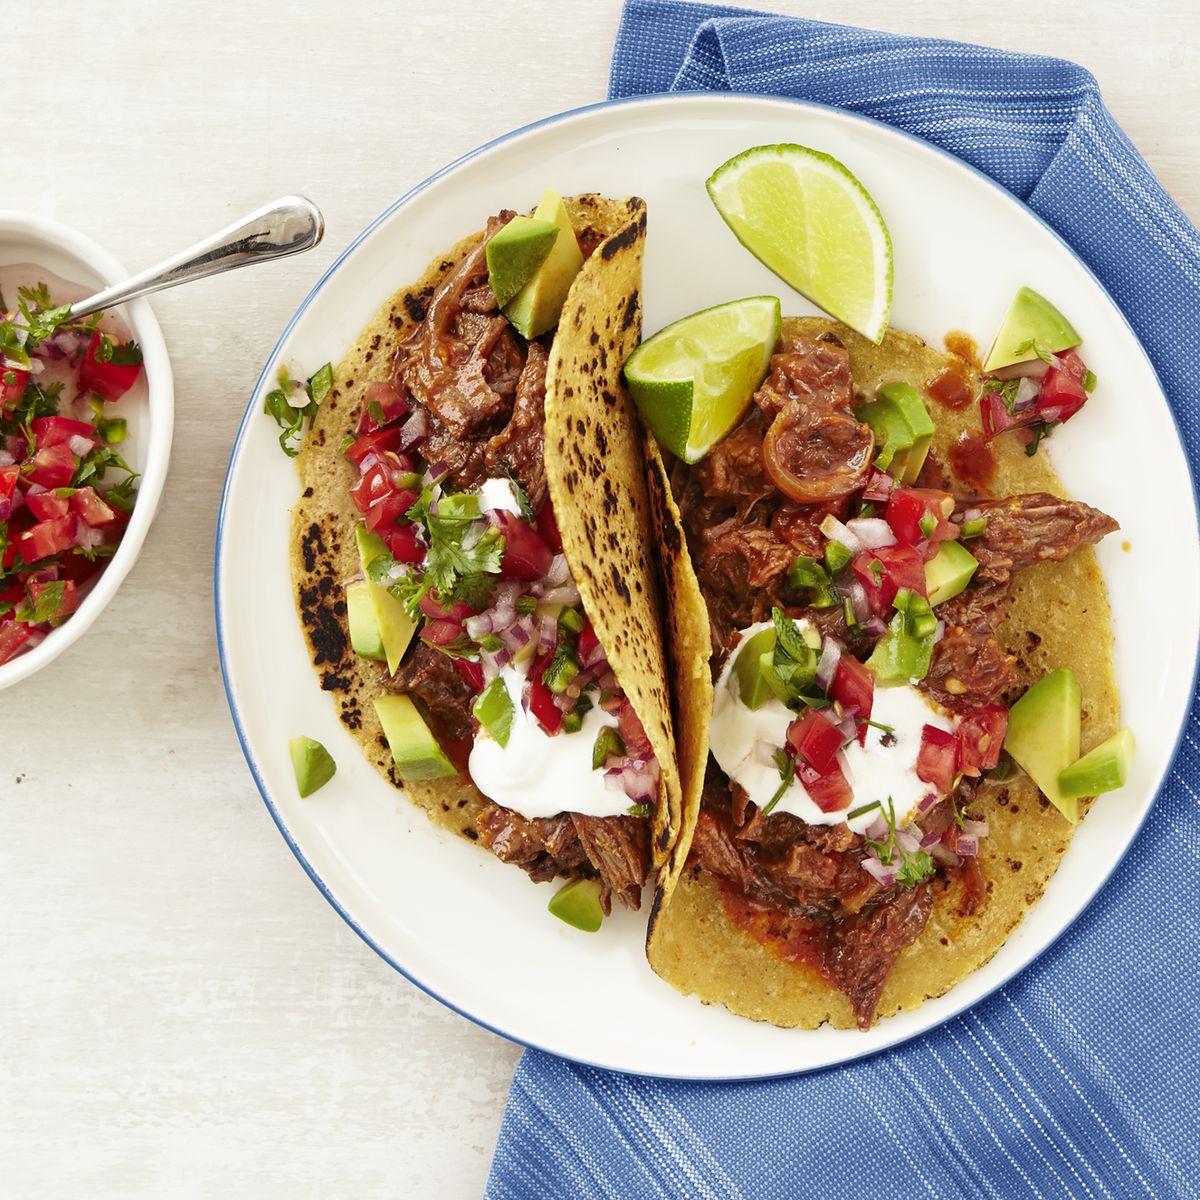 Chipotle Beef Tacos with Pico